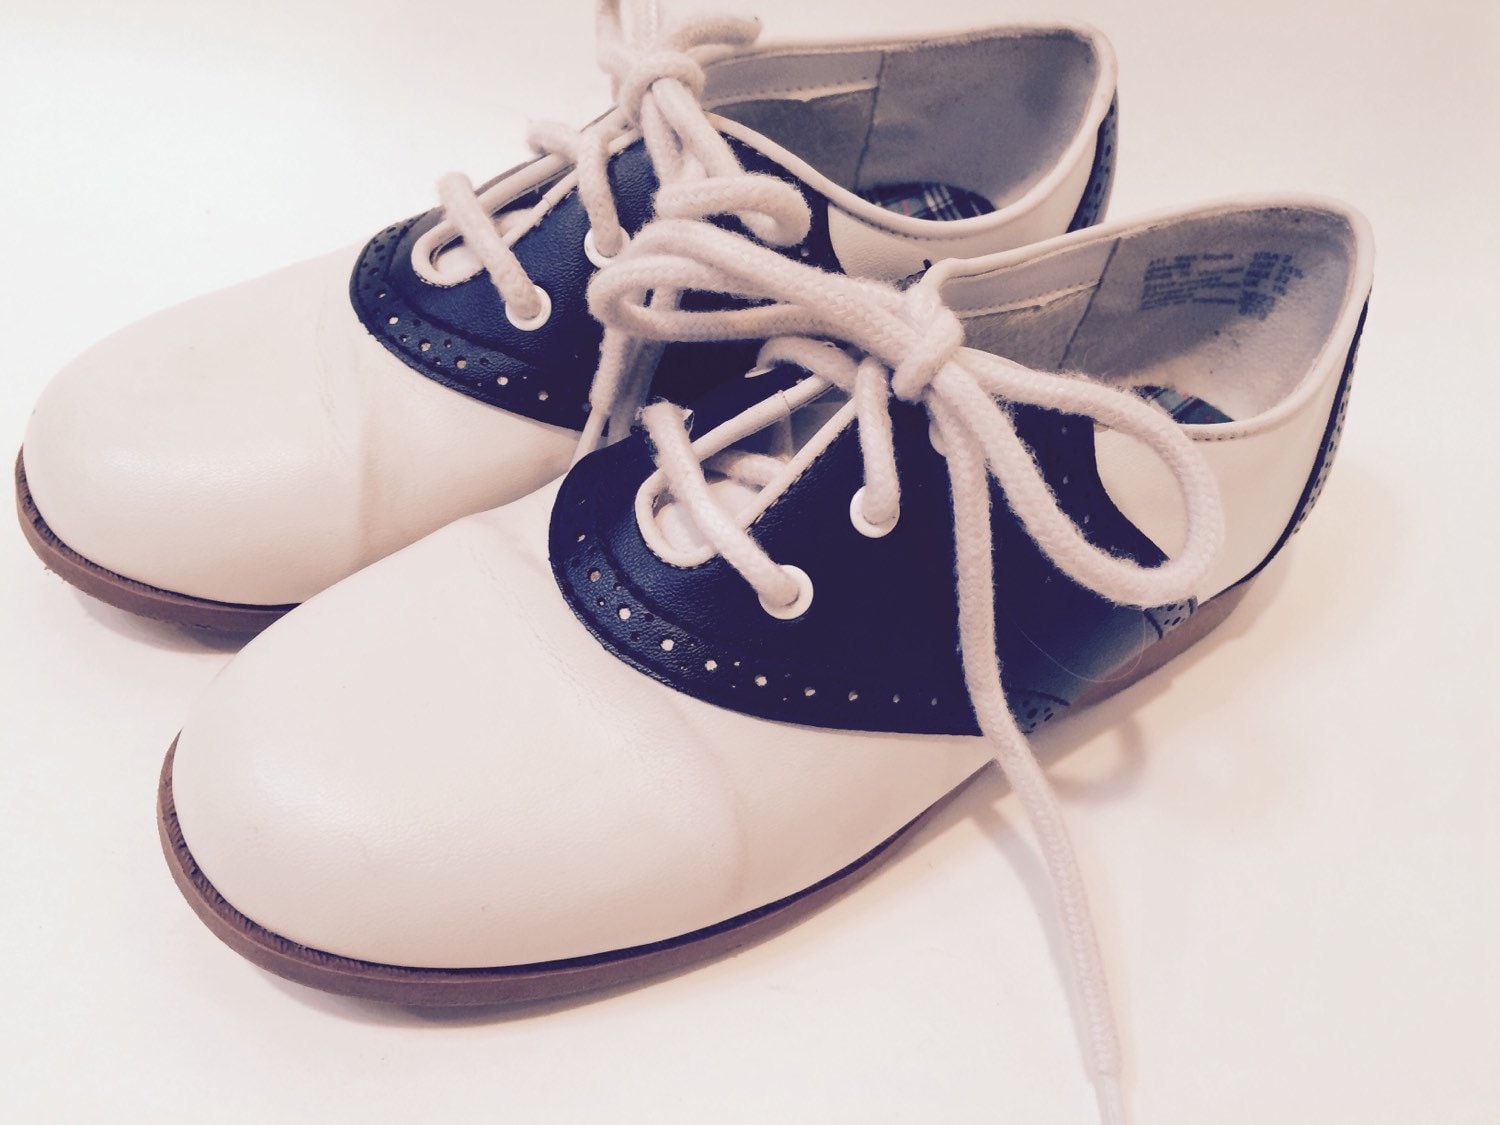 Vintage Black and White Faux Leather Saddle Shoes Girls Size 2